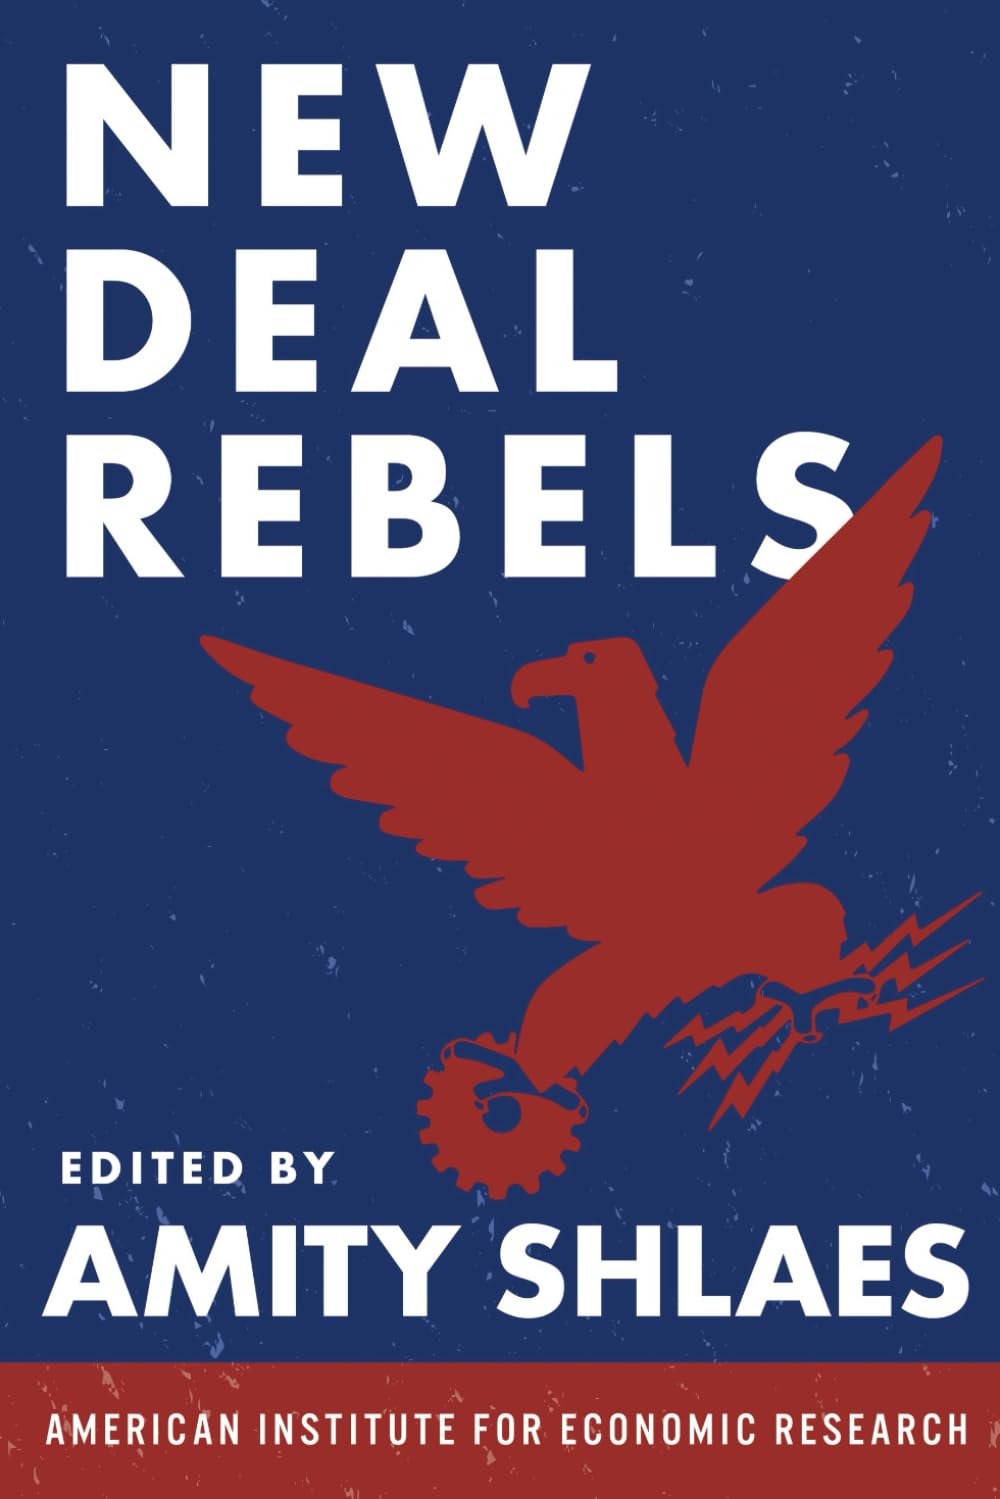 Amity Shlaes, New Deal Rebels book cover